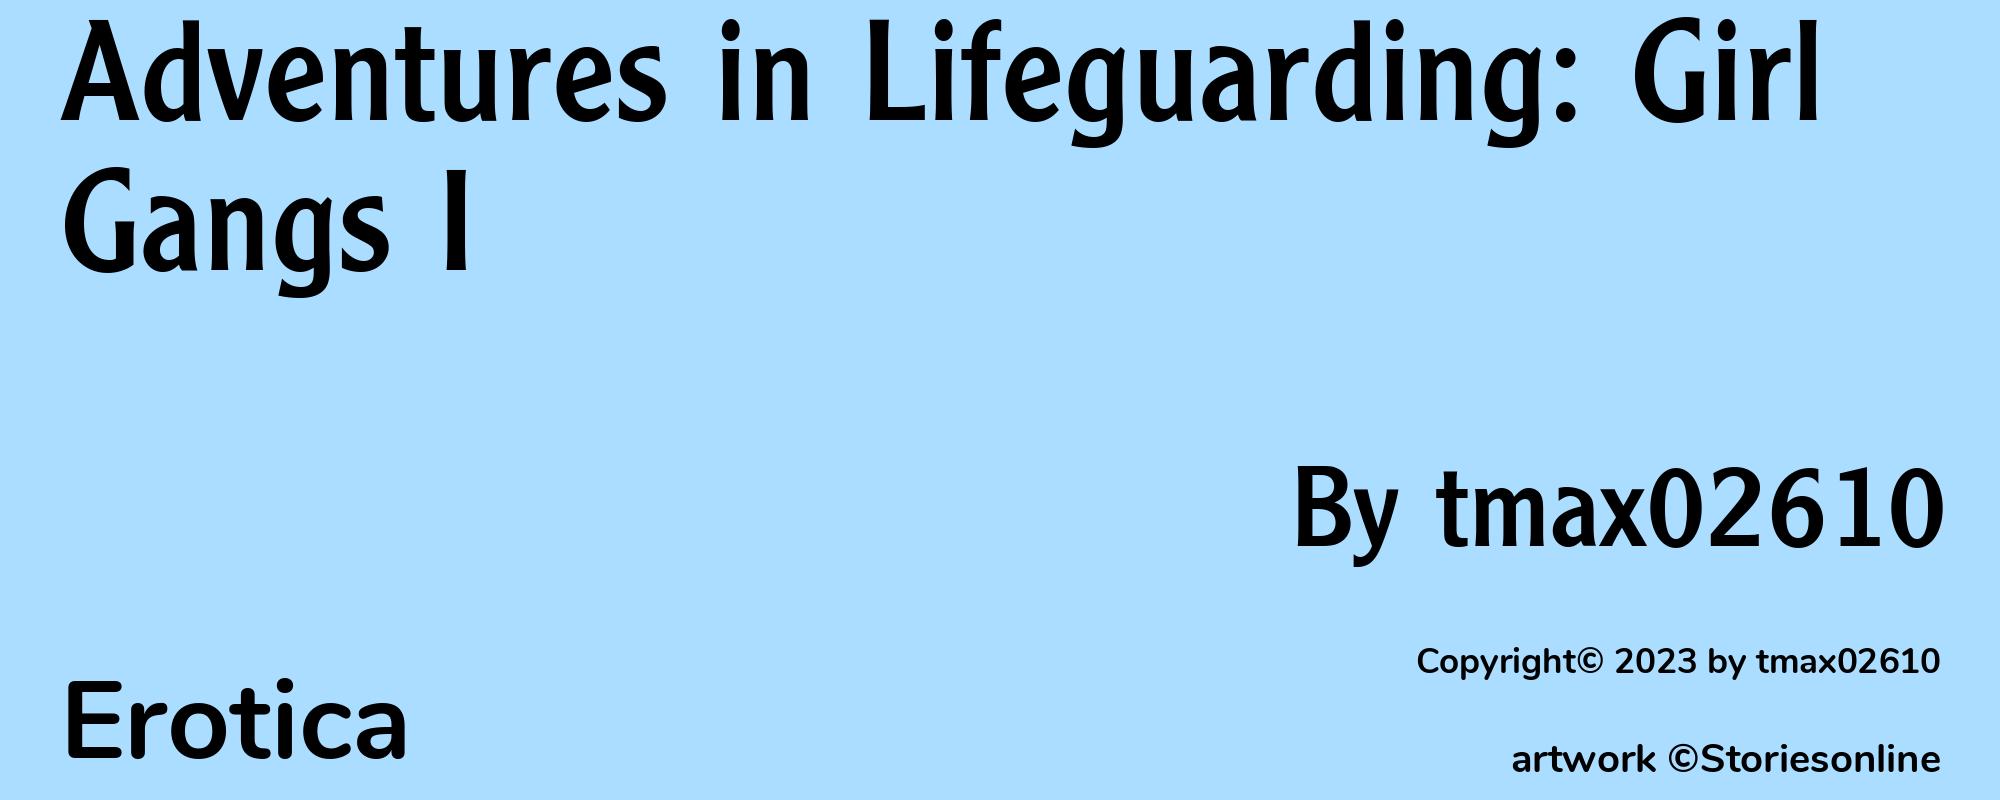 Adventures in Lifeguarding: Girl Gangs I - Cover